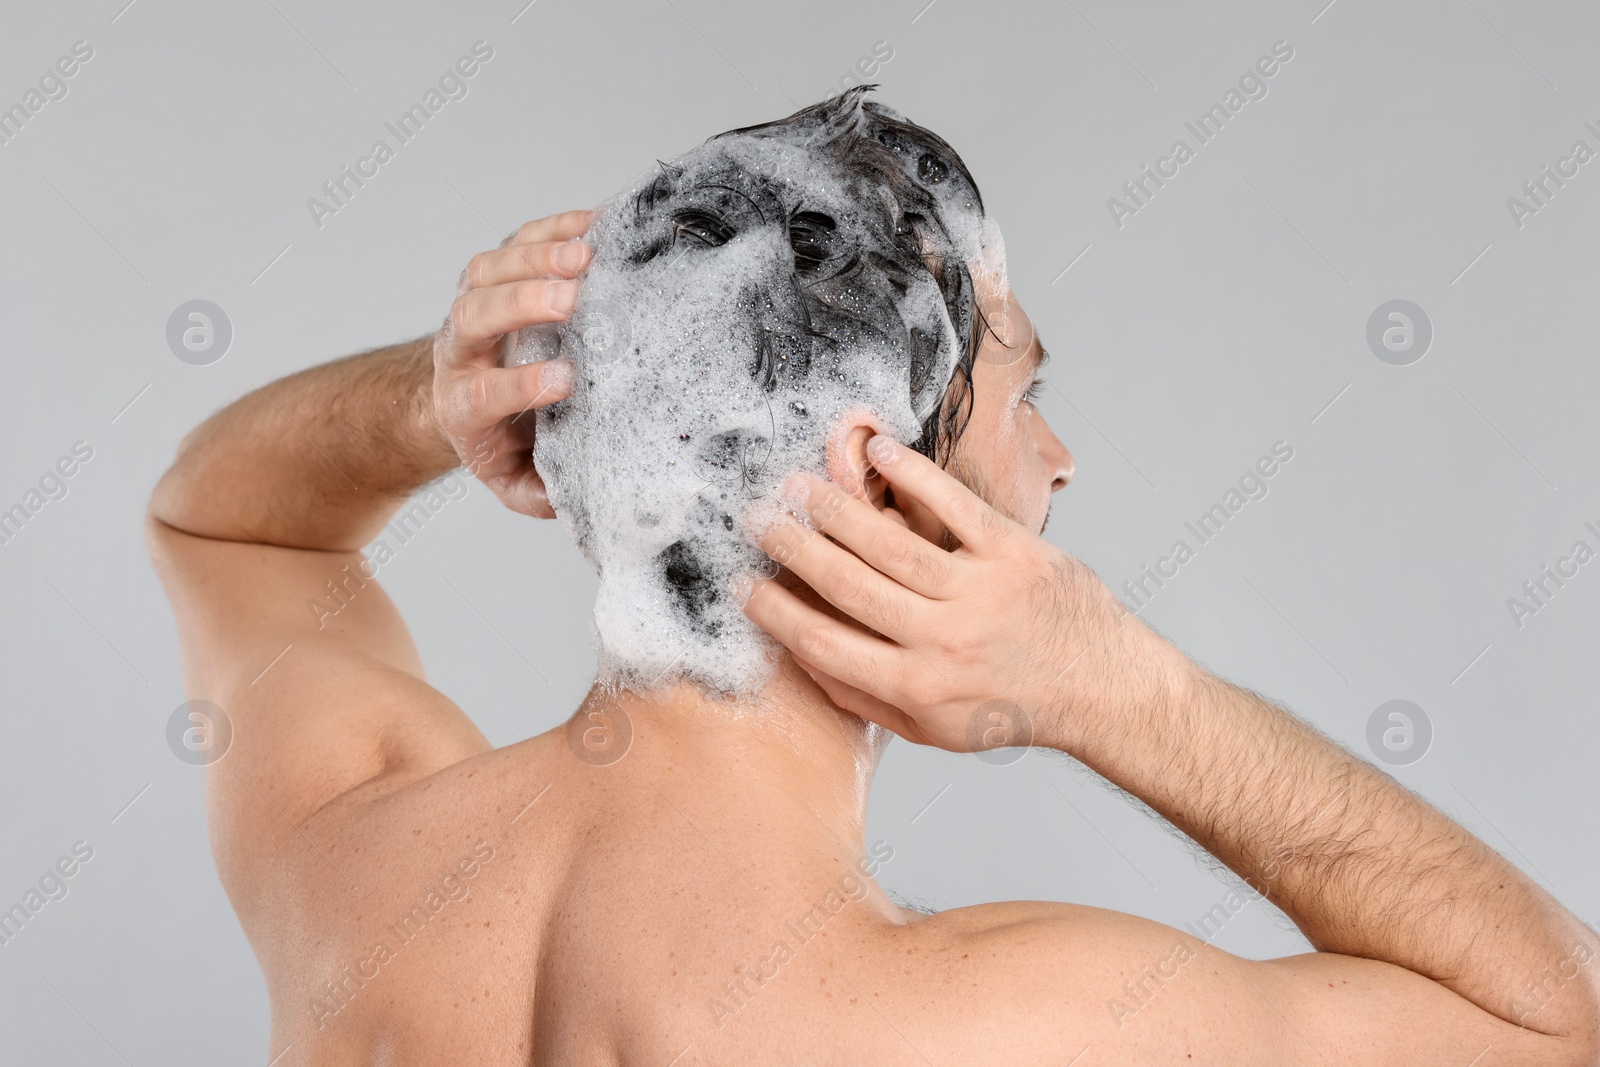 Photo of Man washing his hair with shampoo on grey background, back view